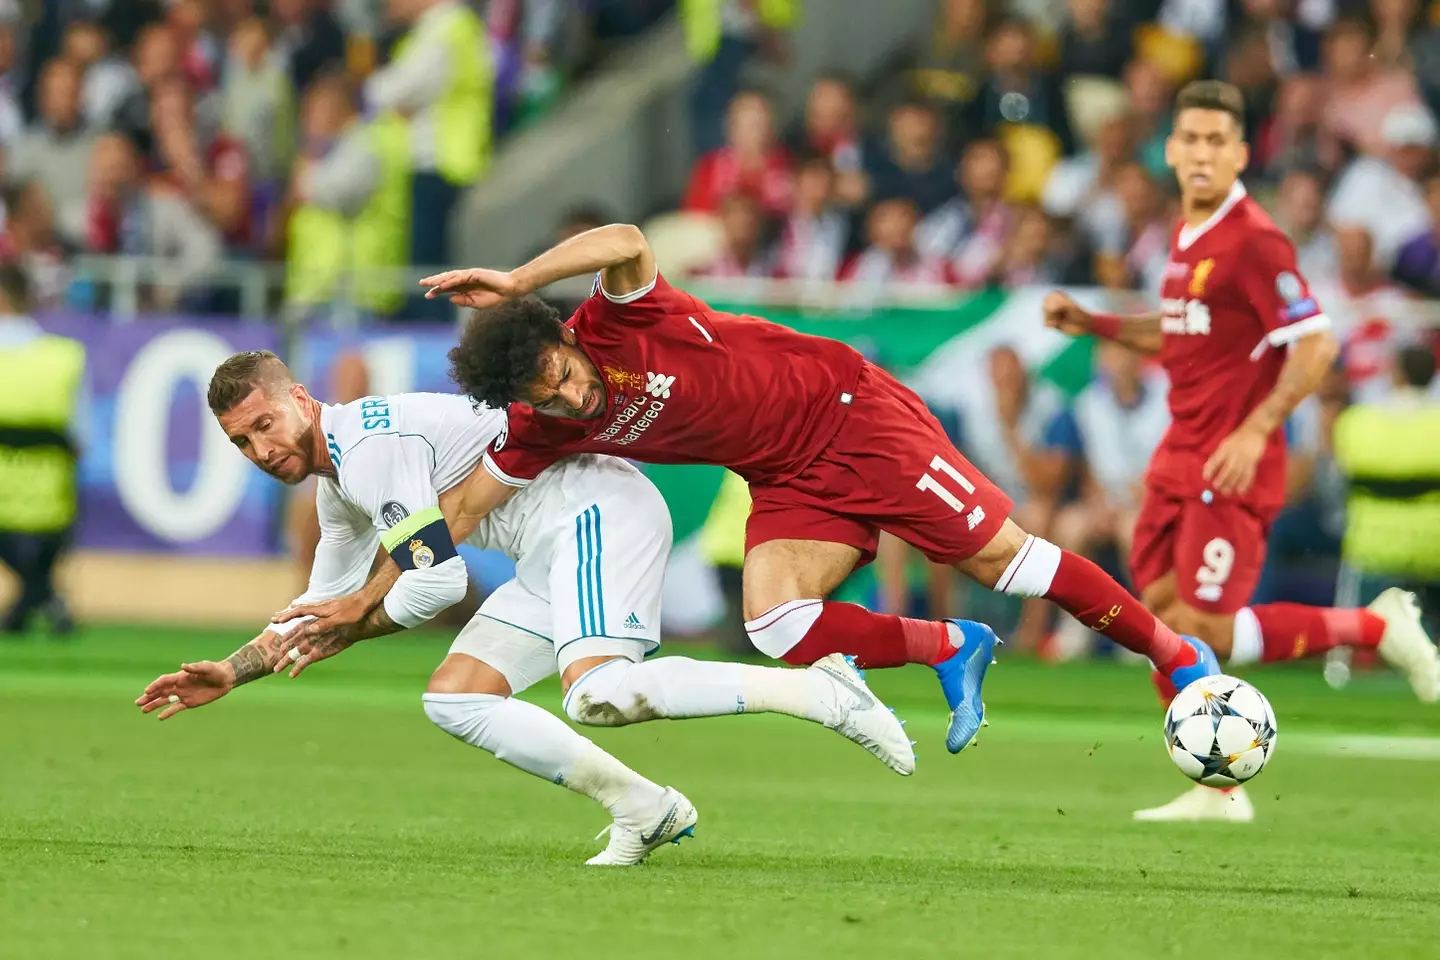 Mohamed Salah has spoken of wanting 'revenge' for the 2018 Champions League final (Image: PA)